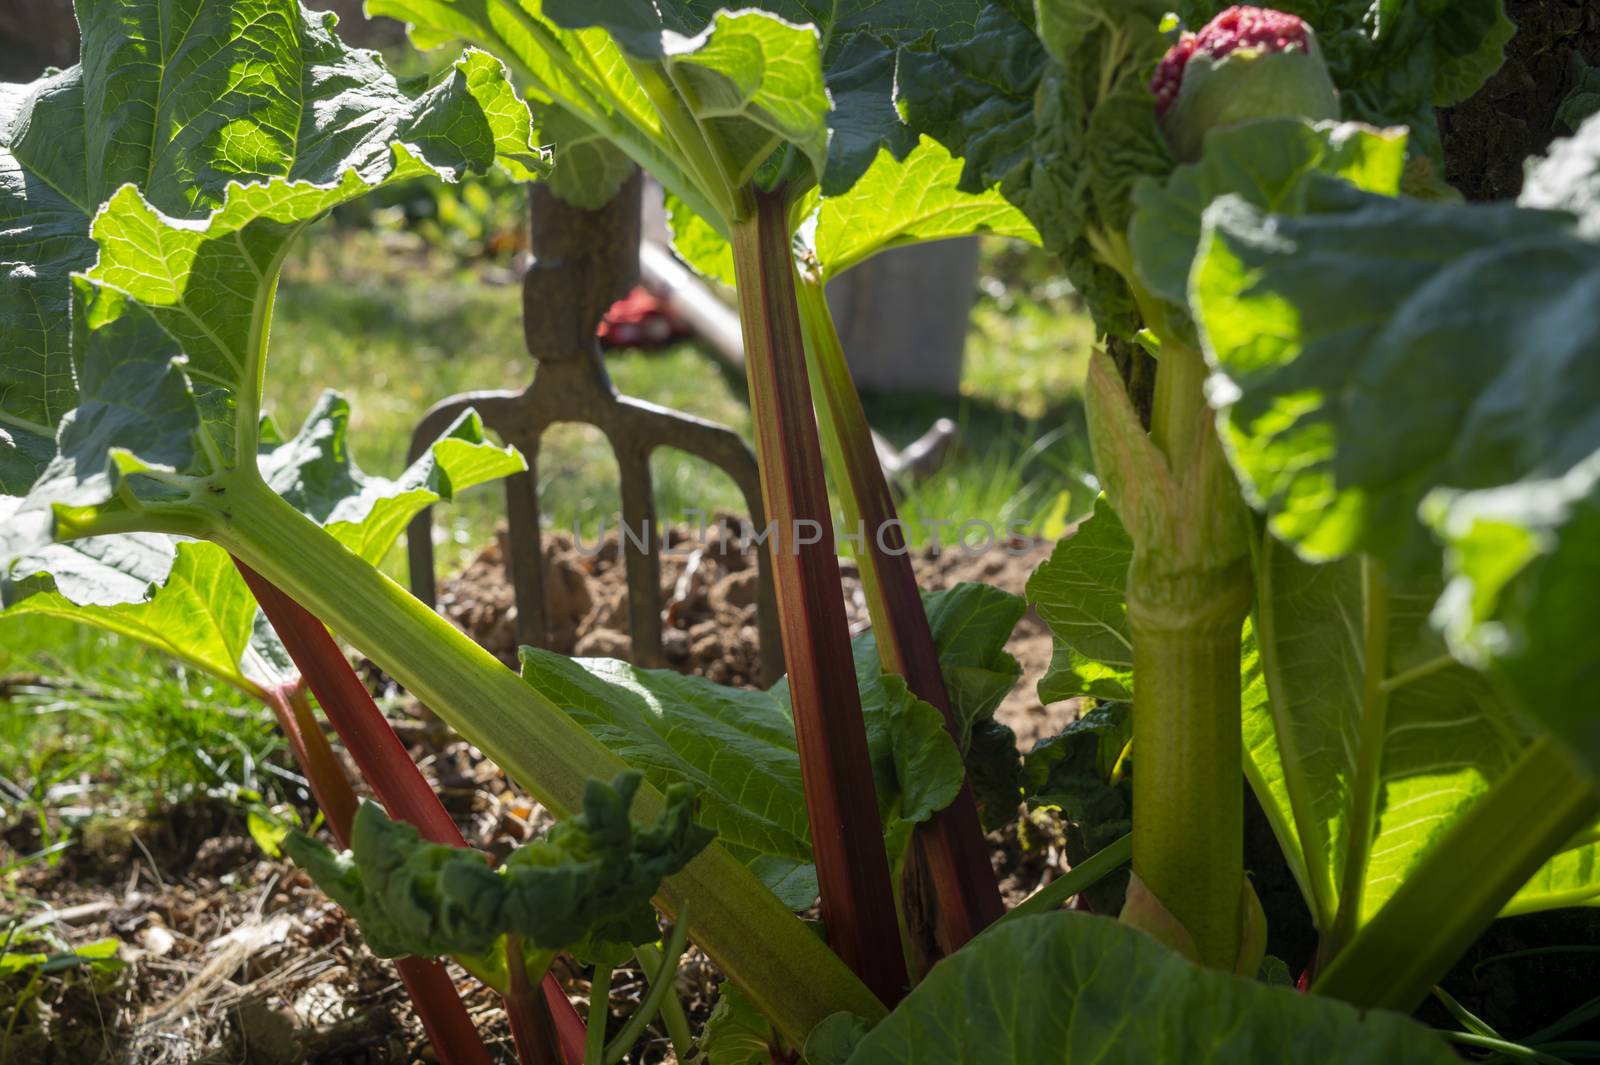 Rhubarb plants growing in an agricultural field in close up on the green leaves and characteristic red stem in spring